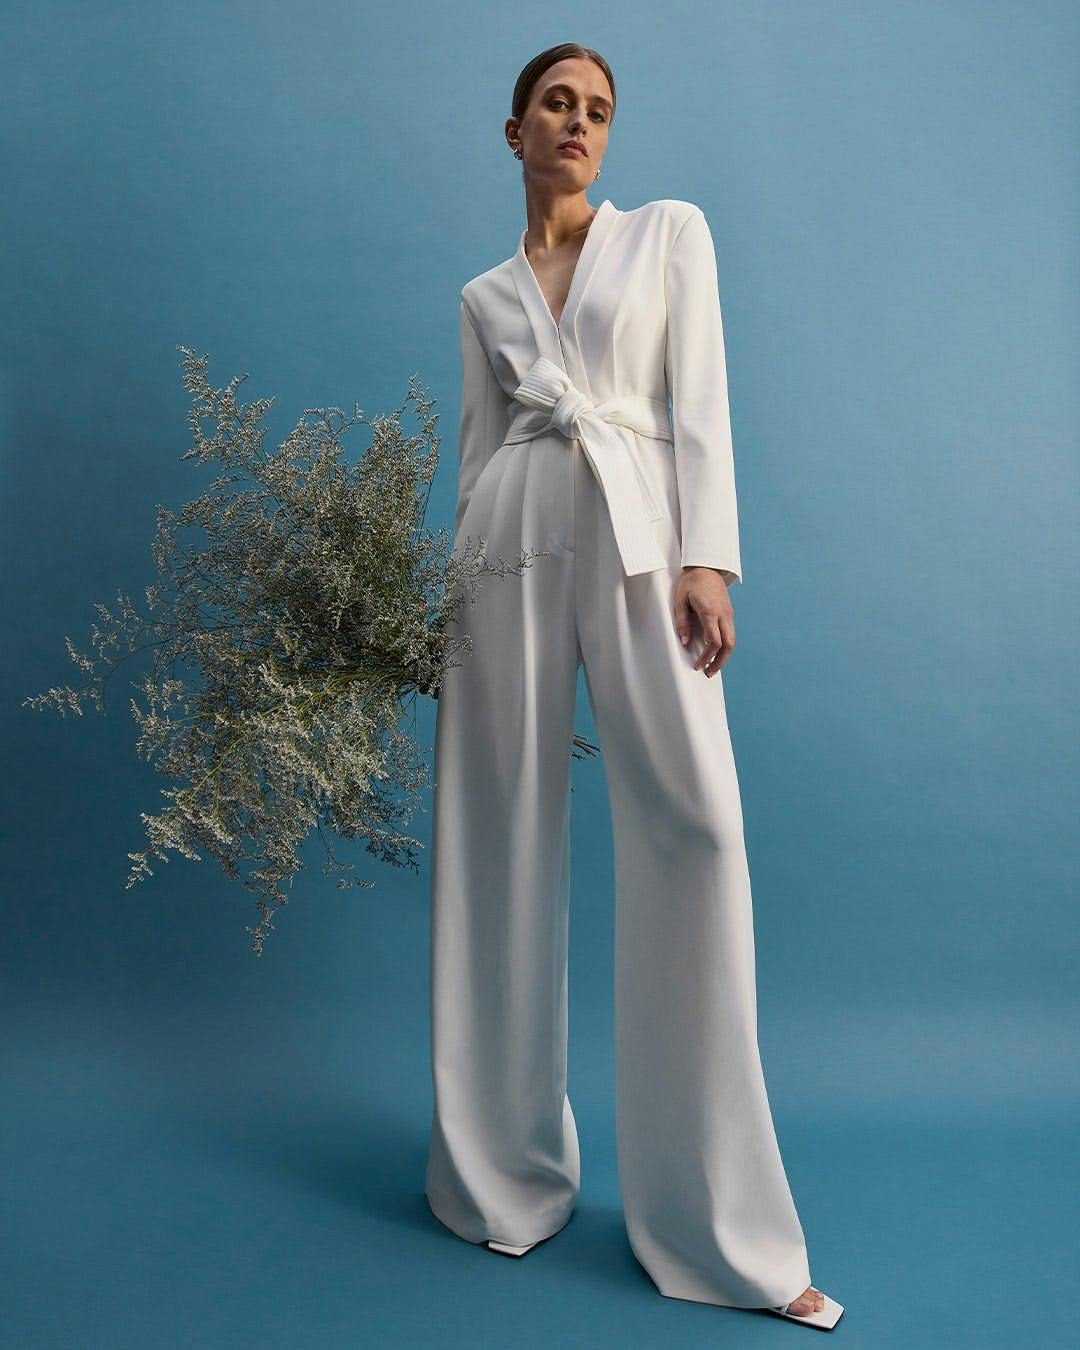 A model in a white bridal jumpsuit.